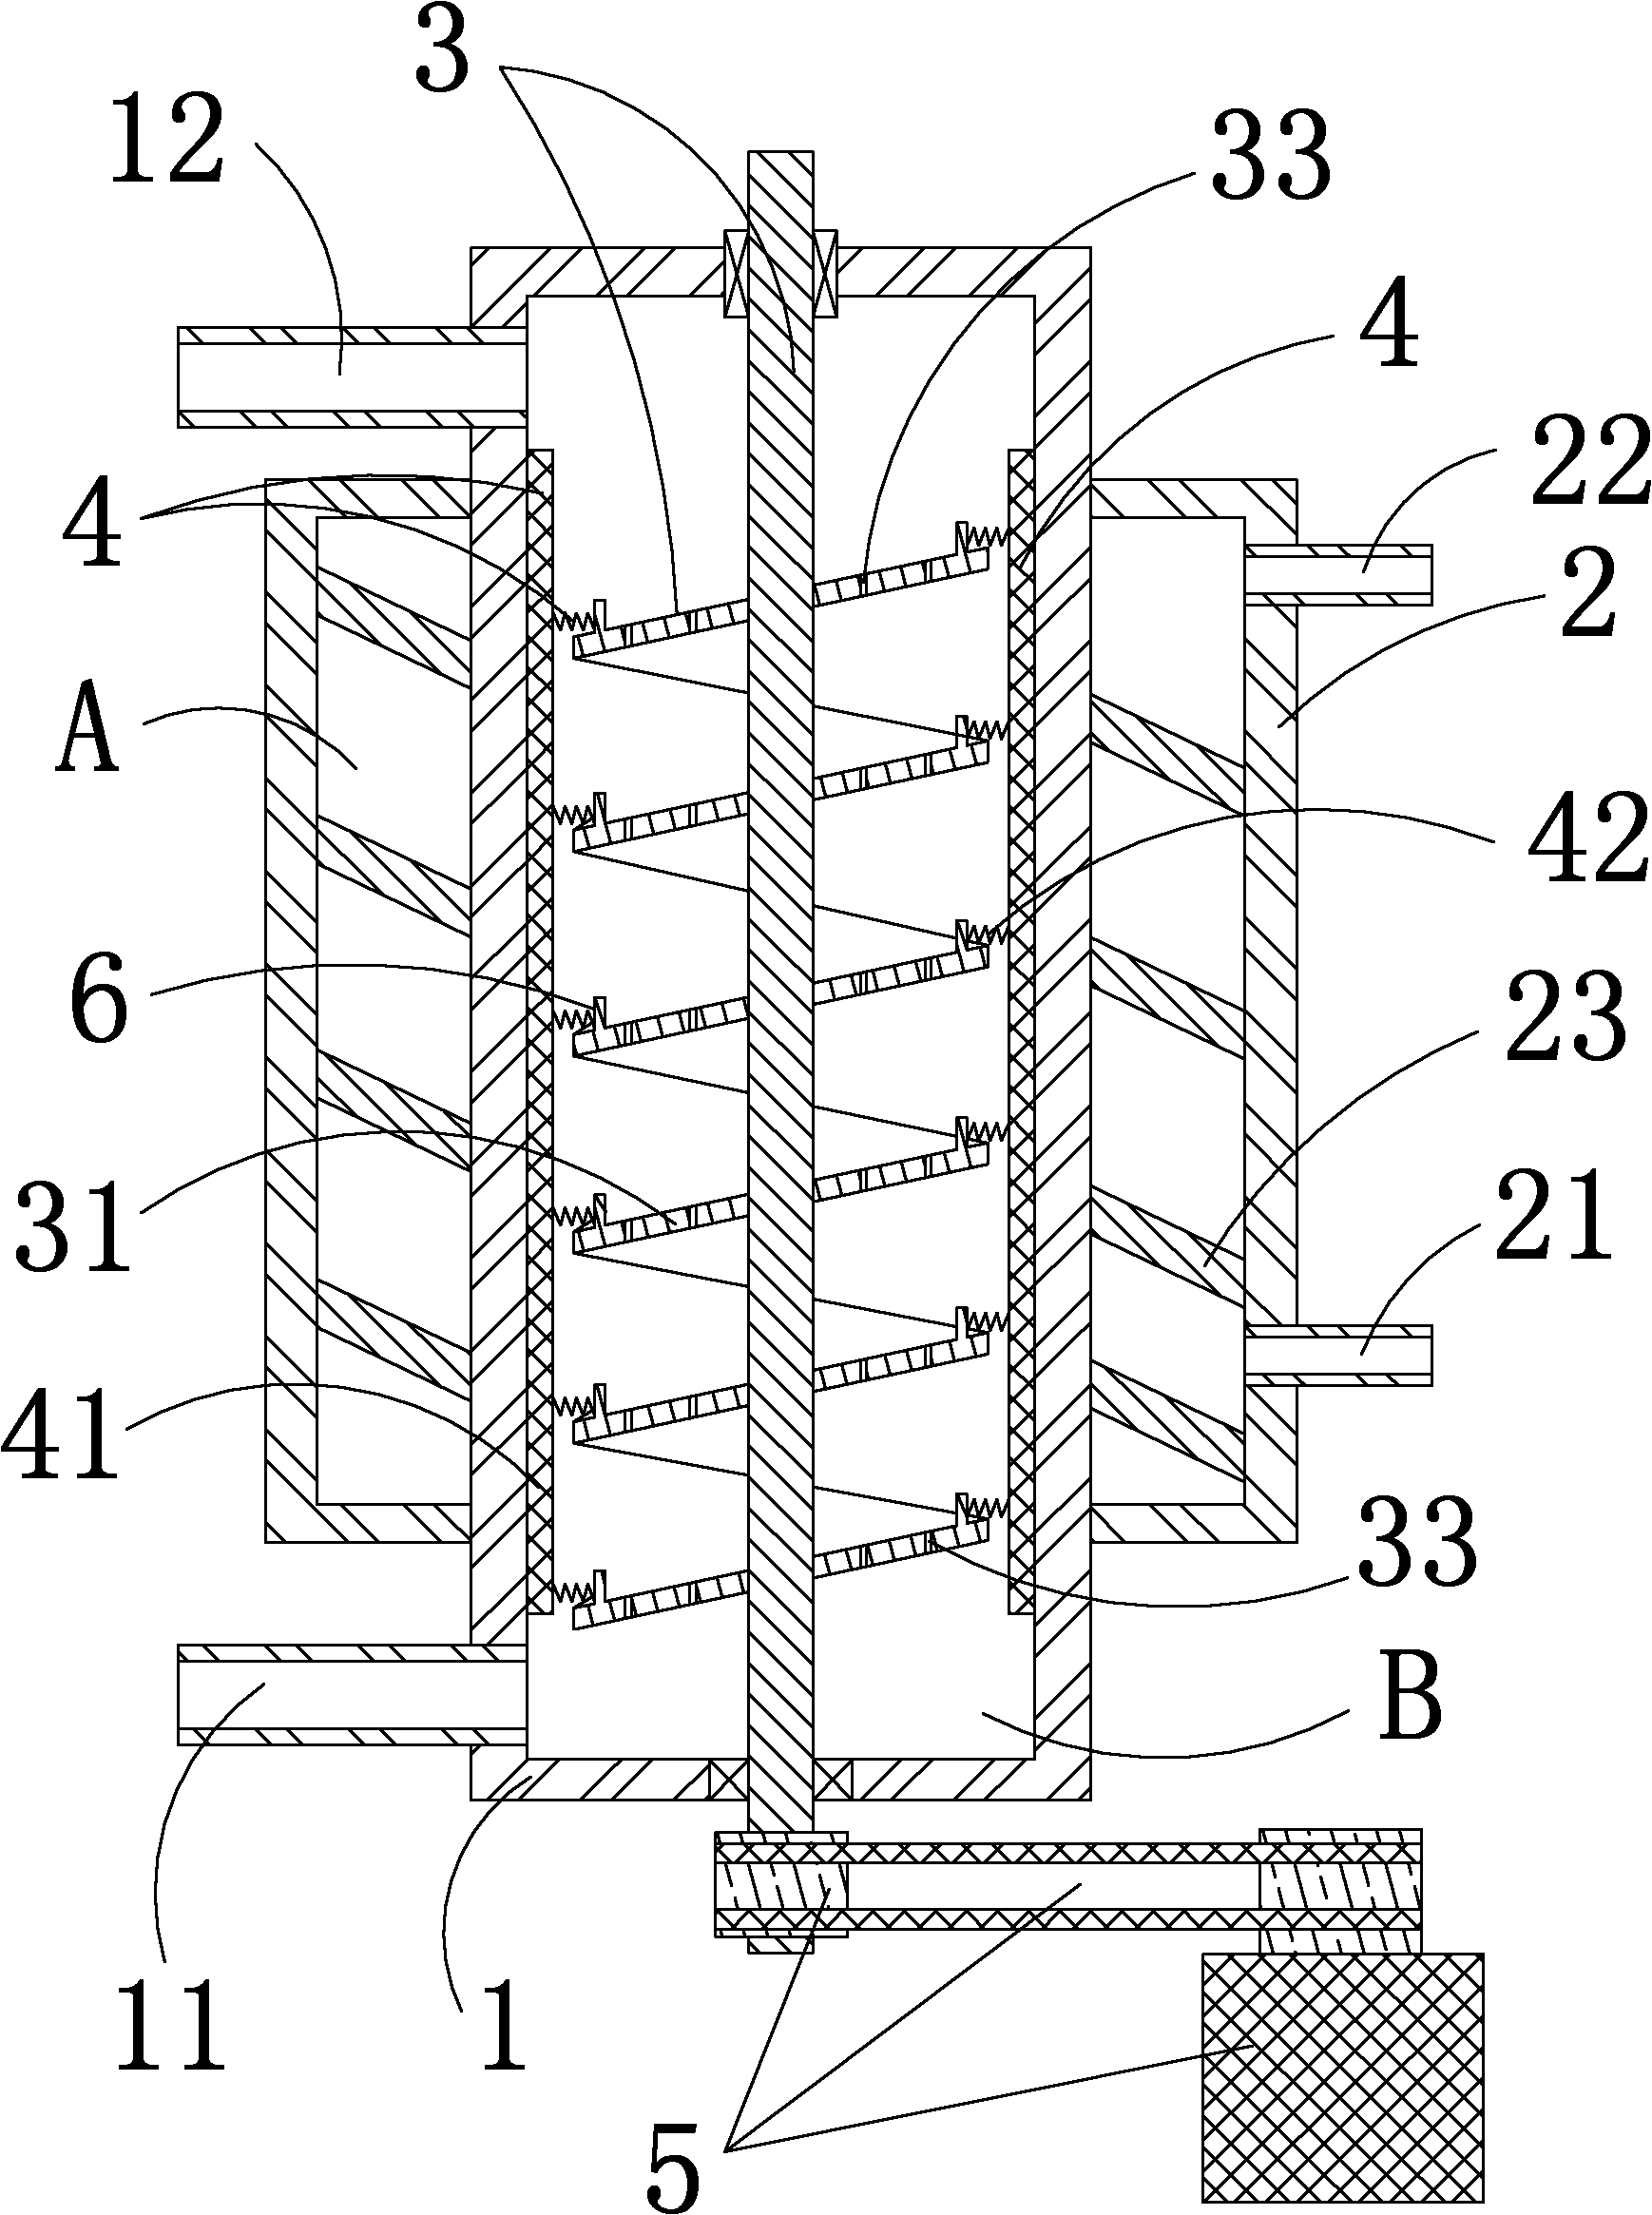 Preparation apparatus for high concentration fluid ice